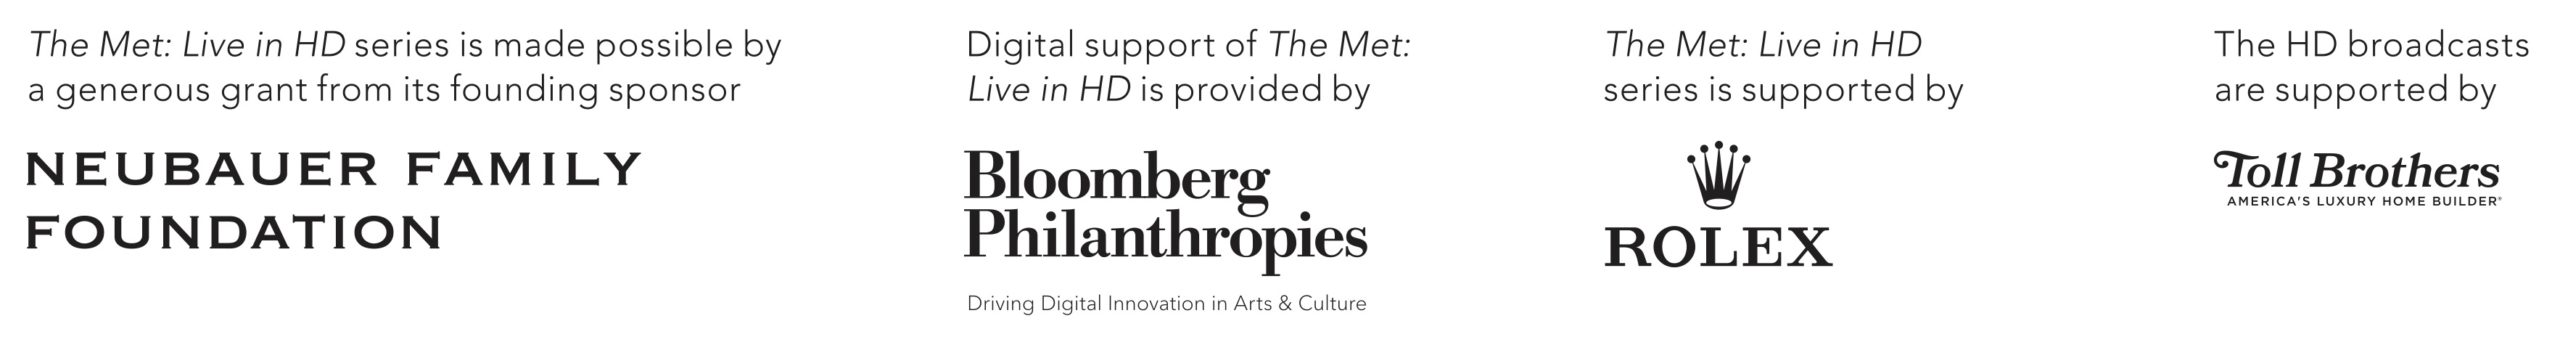 The Met: Live in HD series is made possible by a generous grant from its found sponsor, Neubauer Family Foundation. Digital support of The Met: Live in HD is provided by Bloomberg Philanthropies. THe Med: Live in HD series is supported by Rolex. The HD broadcasts are supported by Toll Brothers, America's luxury Home Builders. 